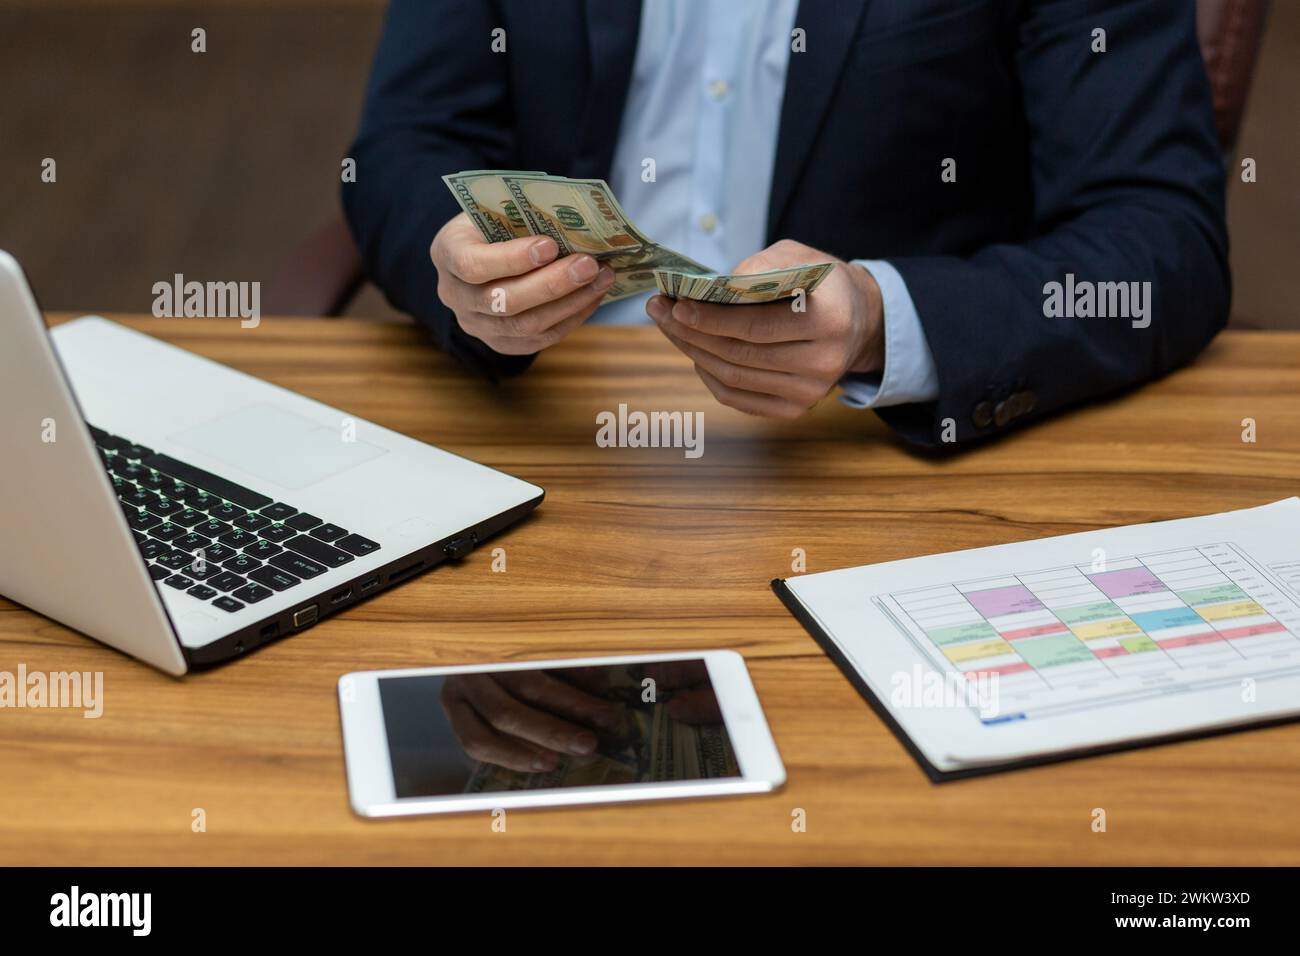 Photo concept close-up of the hand of a young man in a business suit sitting in the office at a table with gadgets, holding and counting cash dollar b Stock Photo